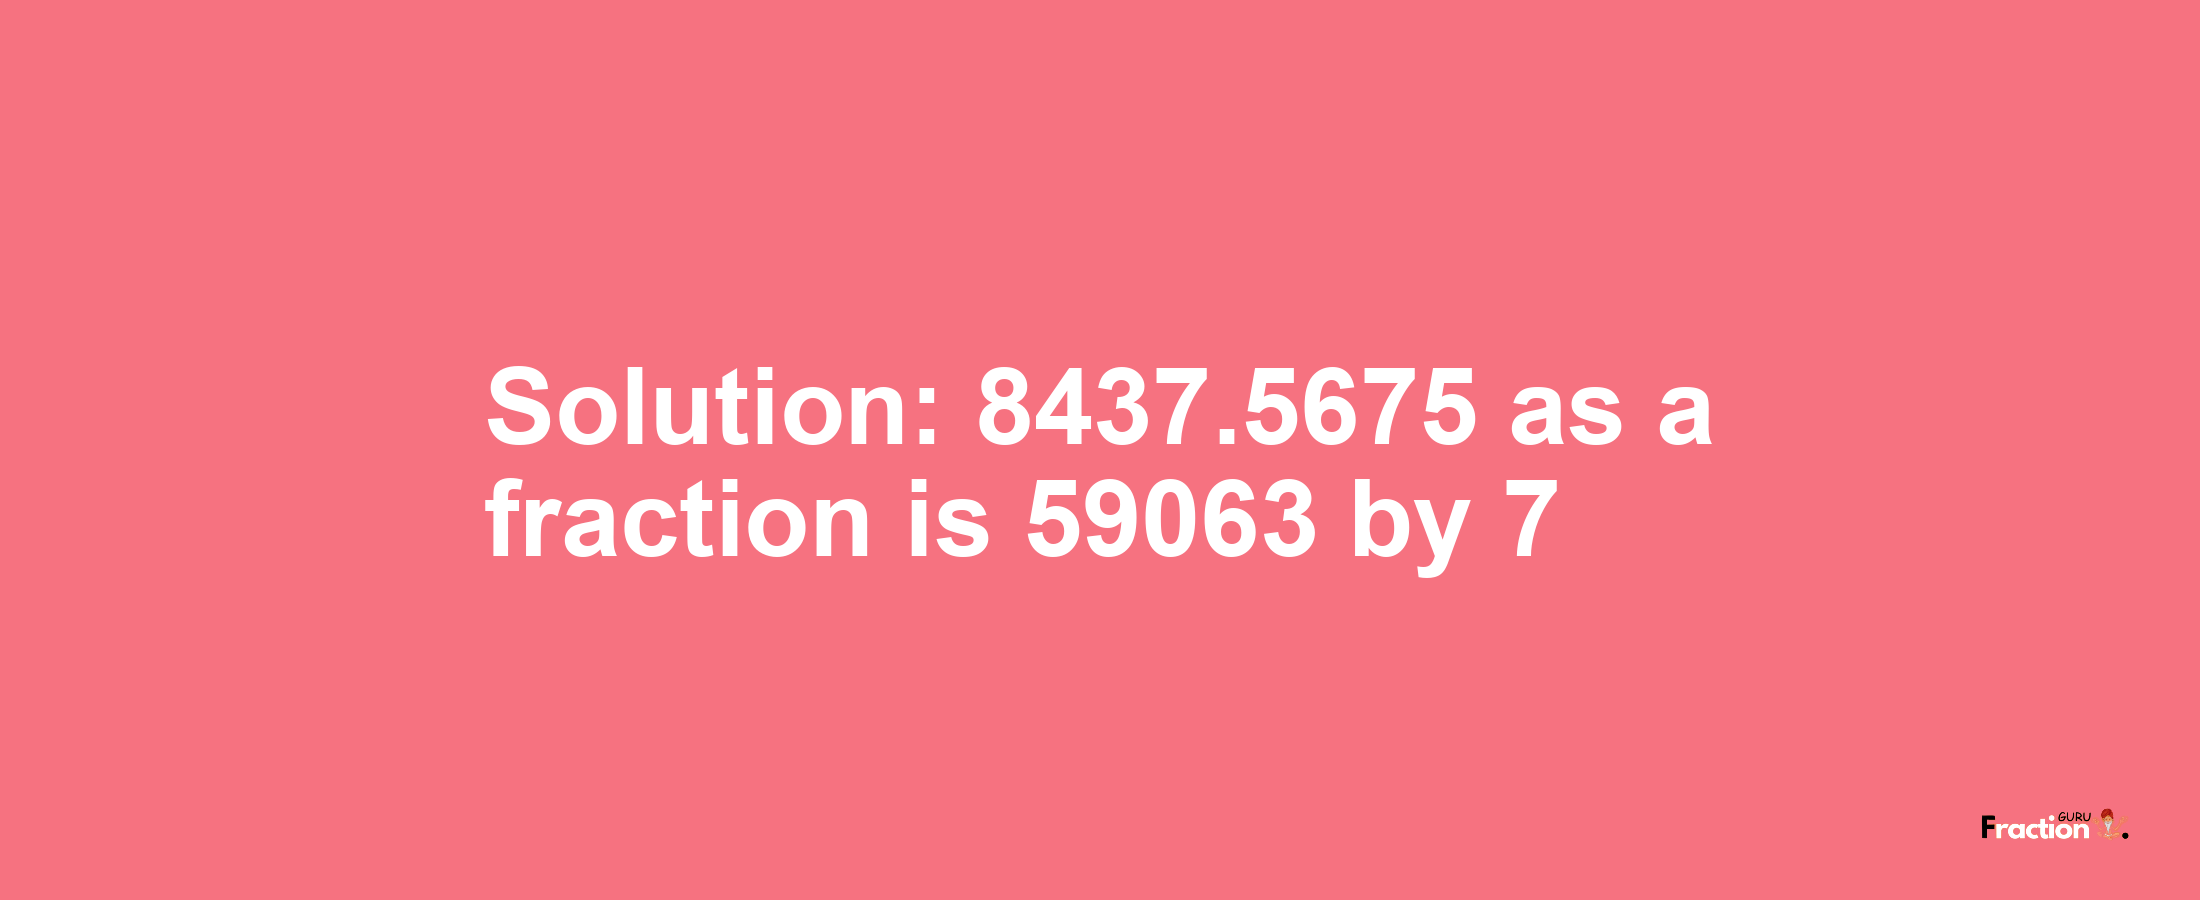 Solution:8437.5675 as a fraction is 59063/7